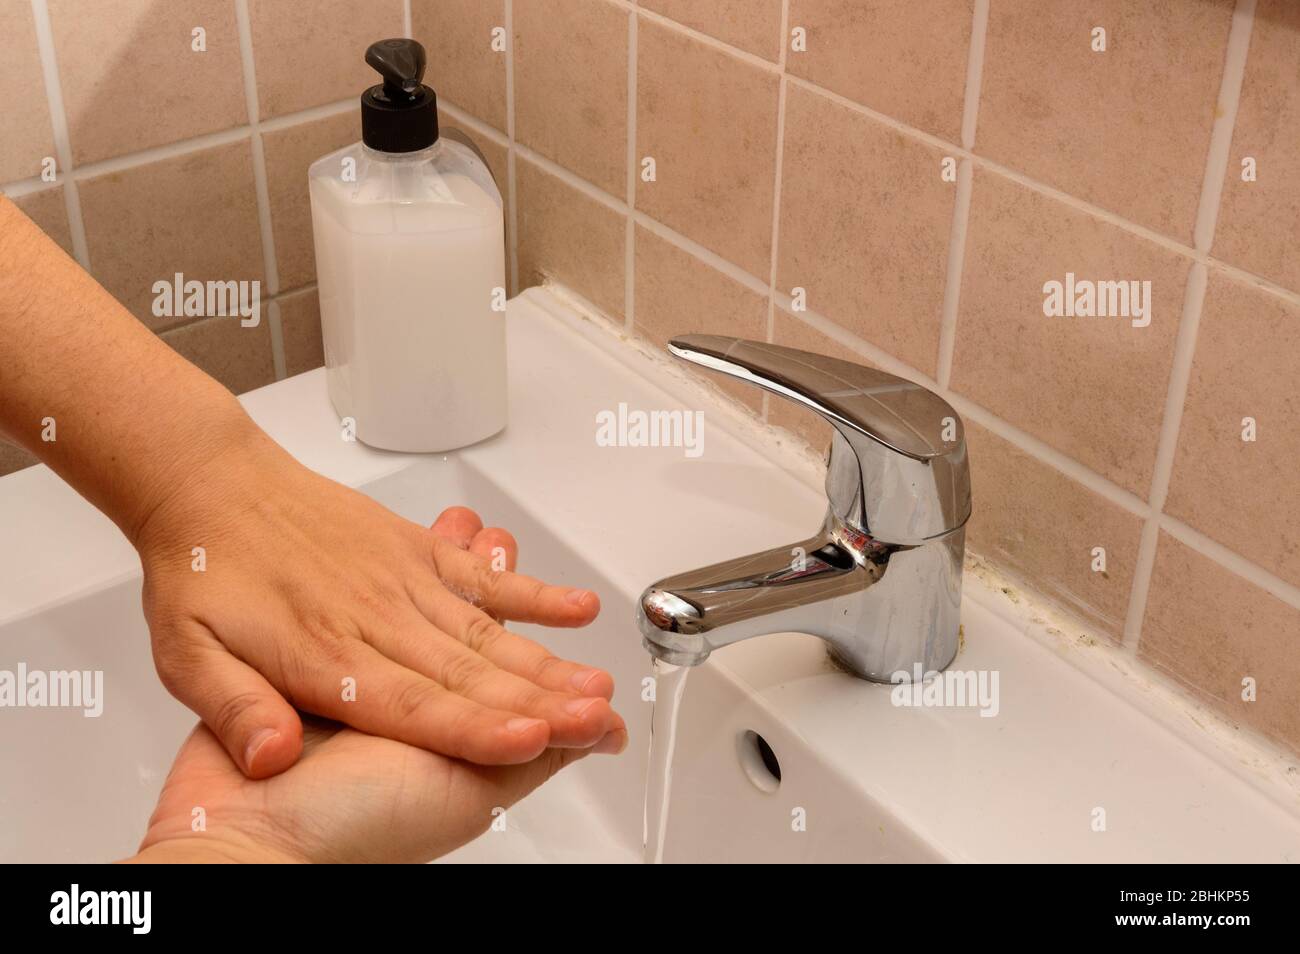 Female Doctor Using A Fully Sanitized Hospital Sink There Is Only One Jar To Disinfect By Washing Your Hands In An Effective And Proper Way To Avoid C Stock Photo